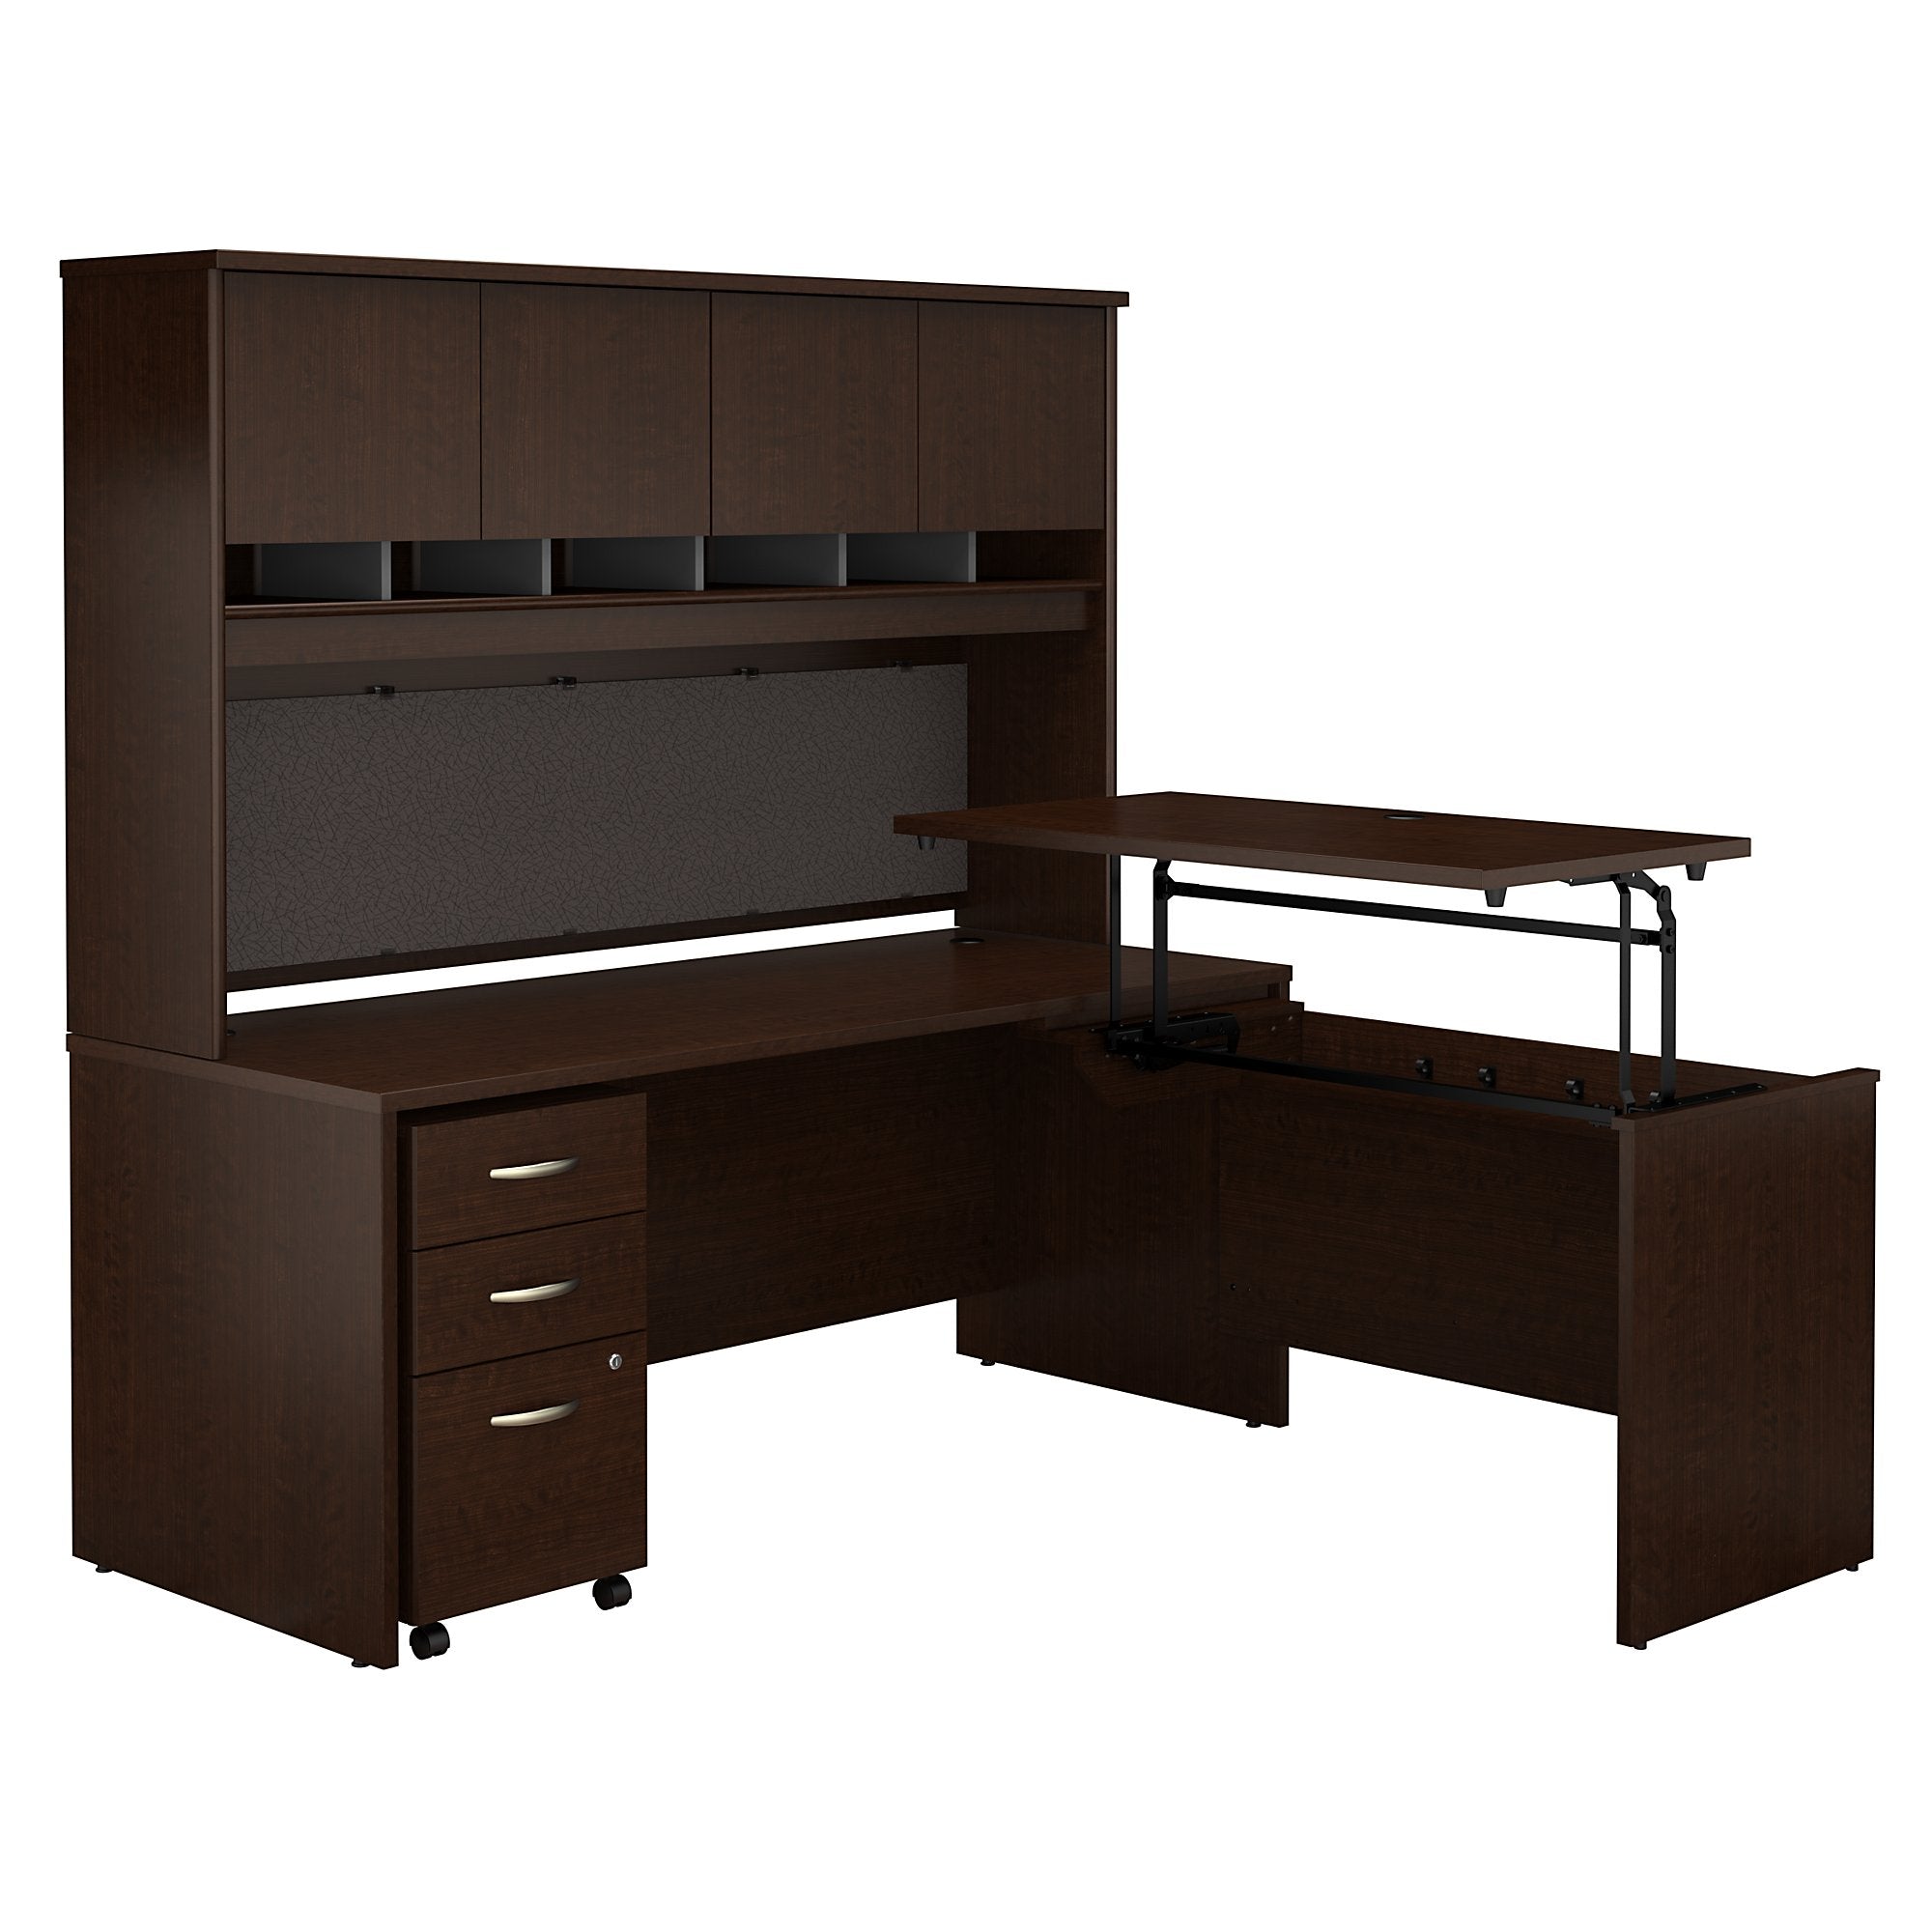 Bush Business Furniture Series C 72W x 30D 3 Position Sit to Stand L Shaped Desk with Hutch and Mobile File Cabinet | Mocha Cherry